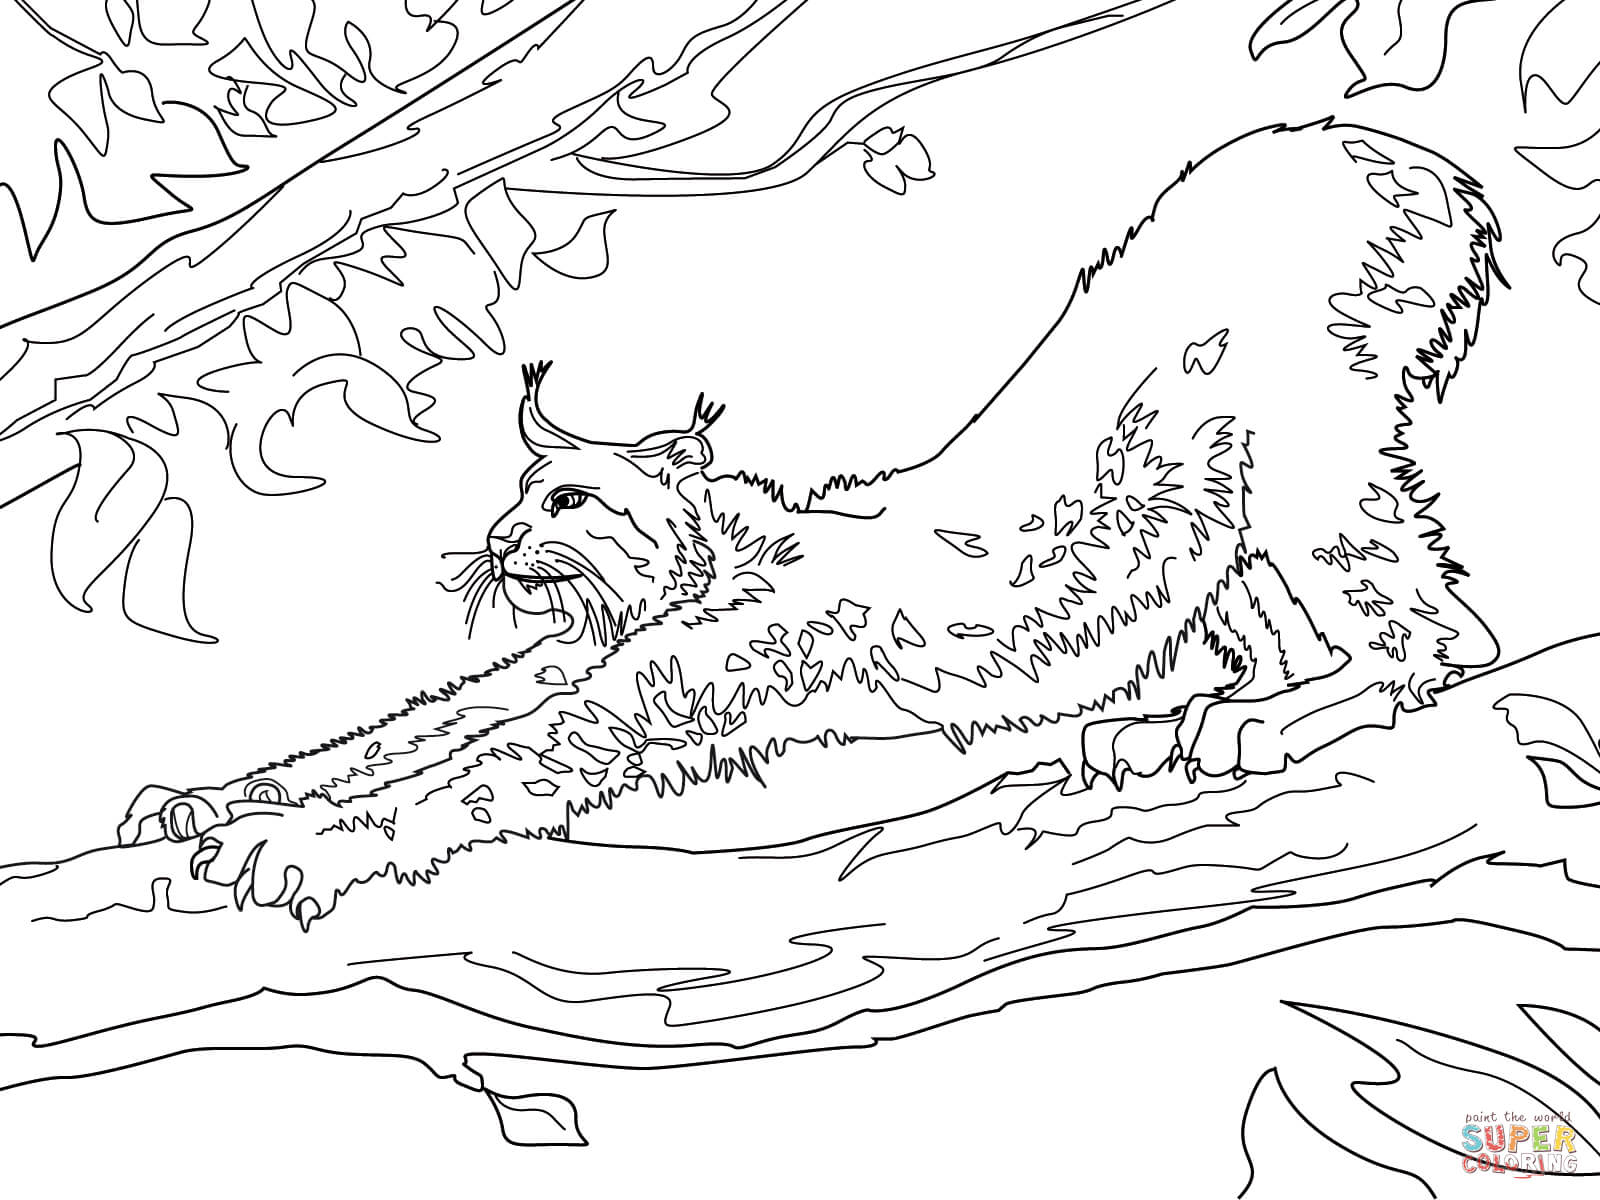 Lynx coloring pages | Free Coloring Pages